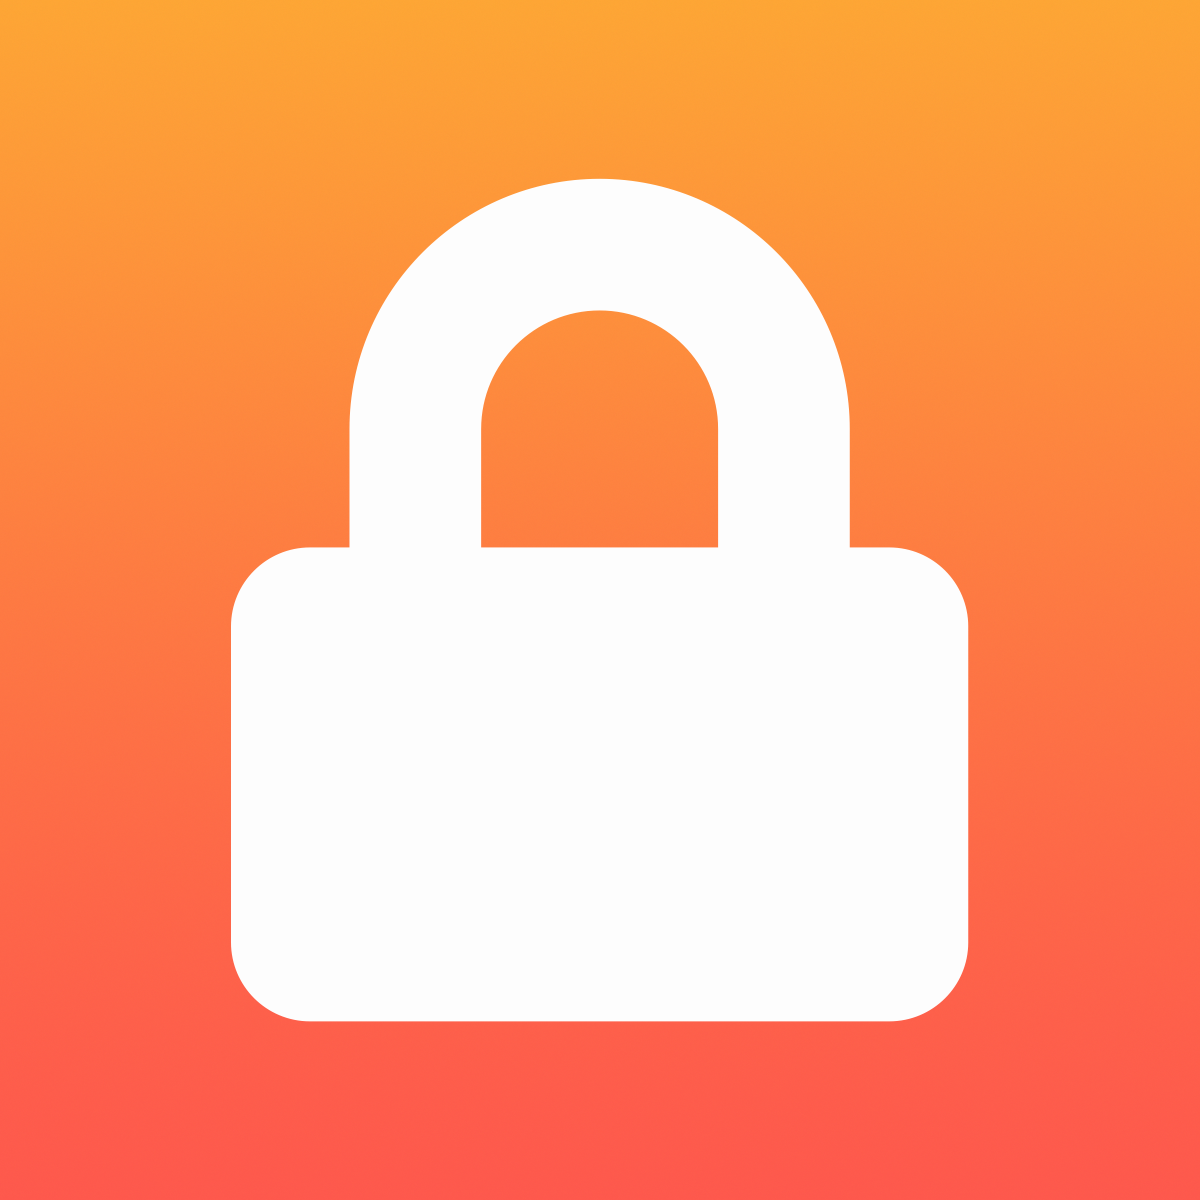 Hire Shopify Experts to integrate Locksmith app into a Shopify store